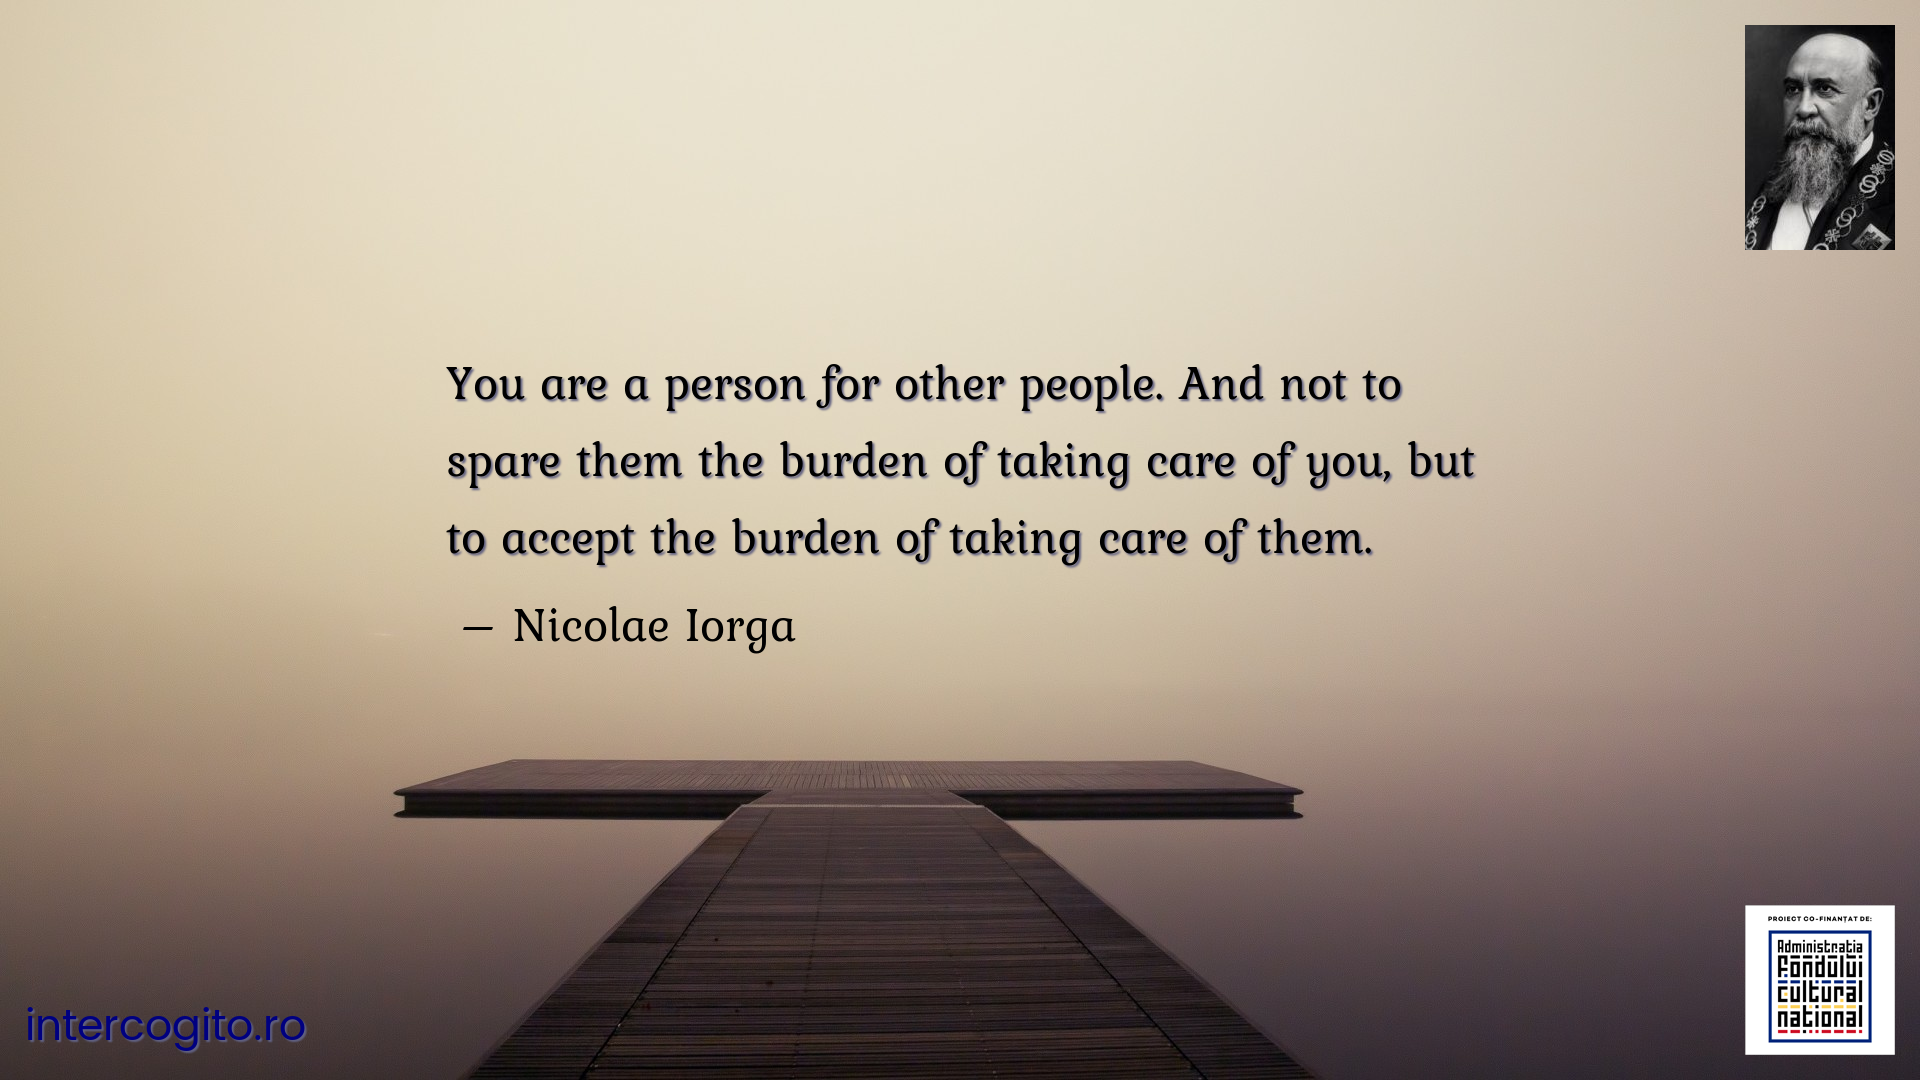 You are a person for other people. And not to spare them the burden of taking care of you, but to accept the burden of taking care of them.